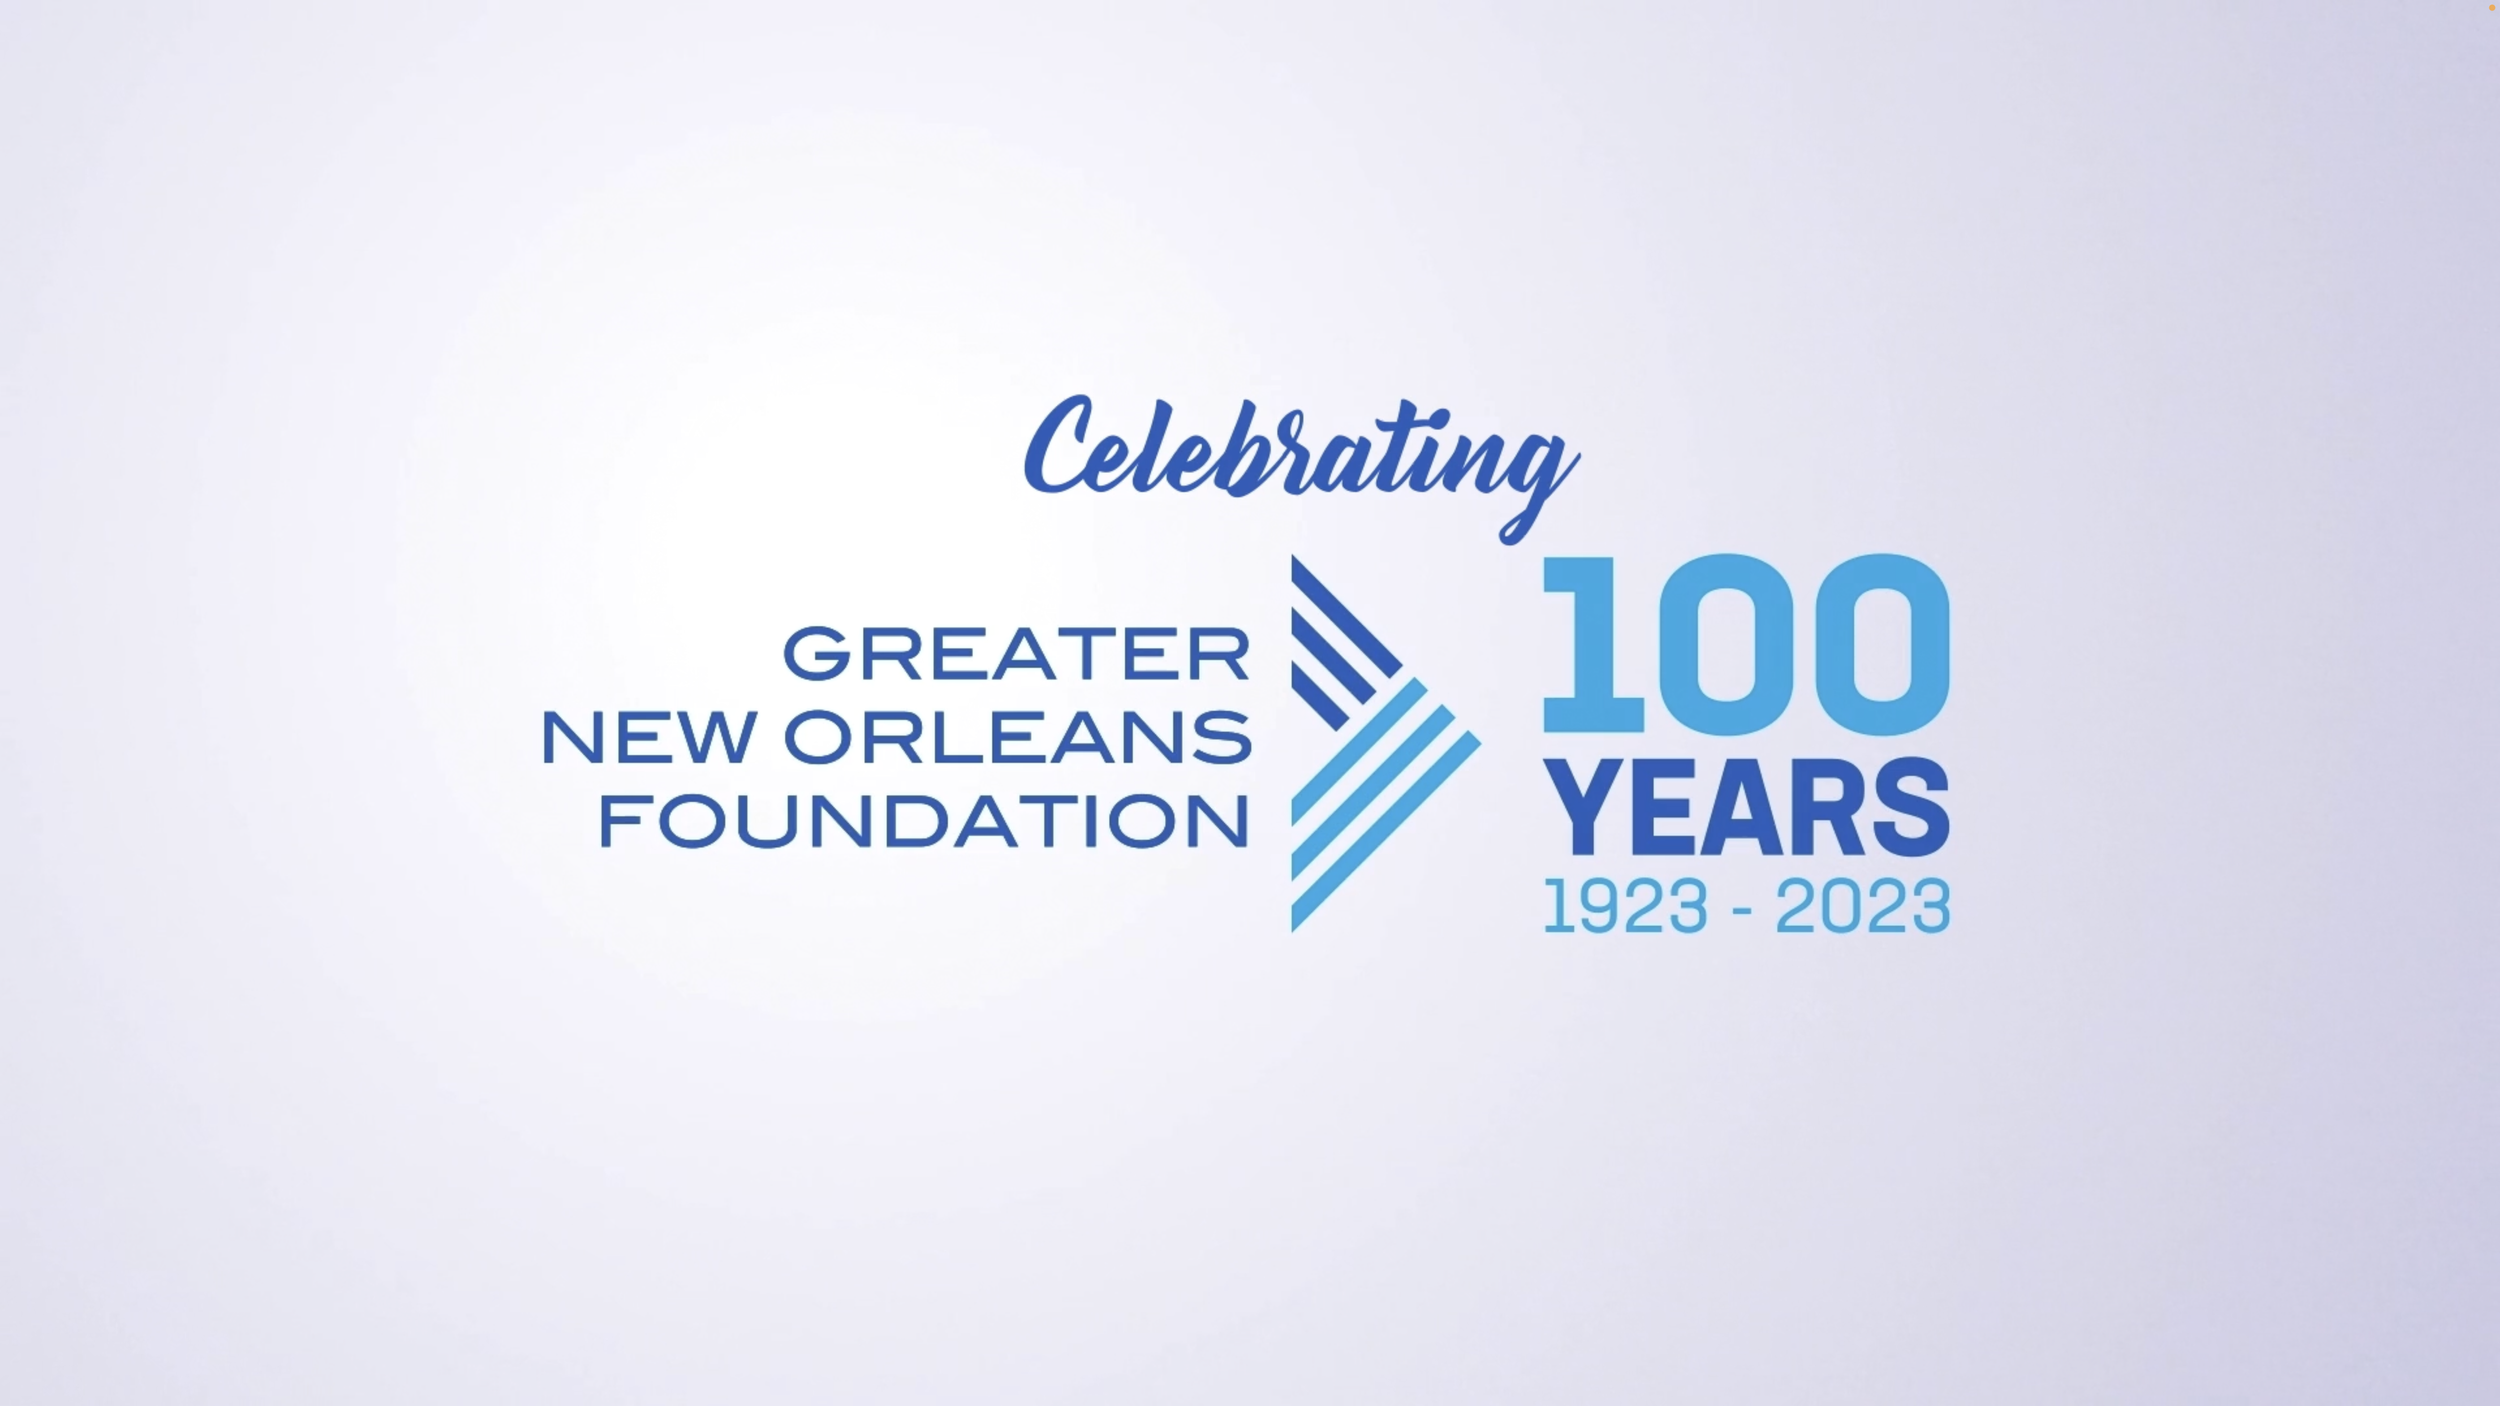 Greater New Orleans Foundation